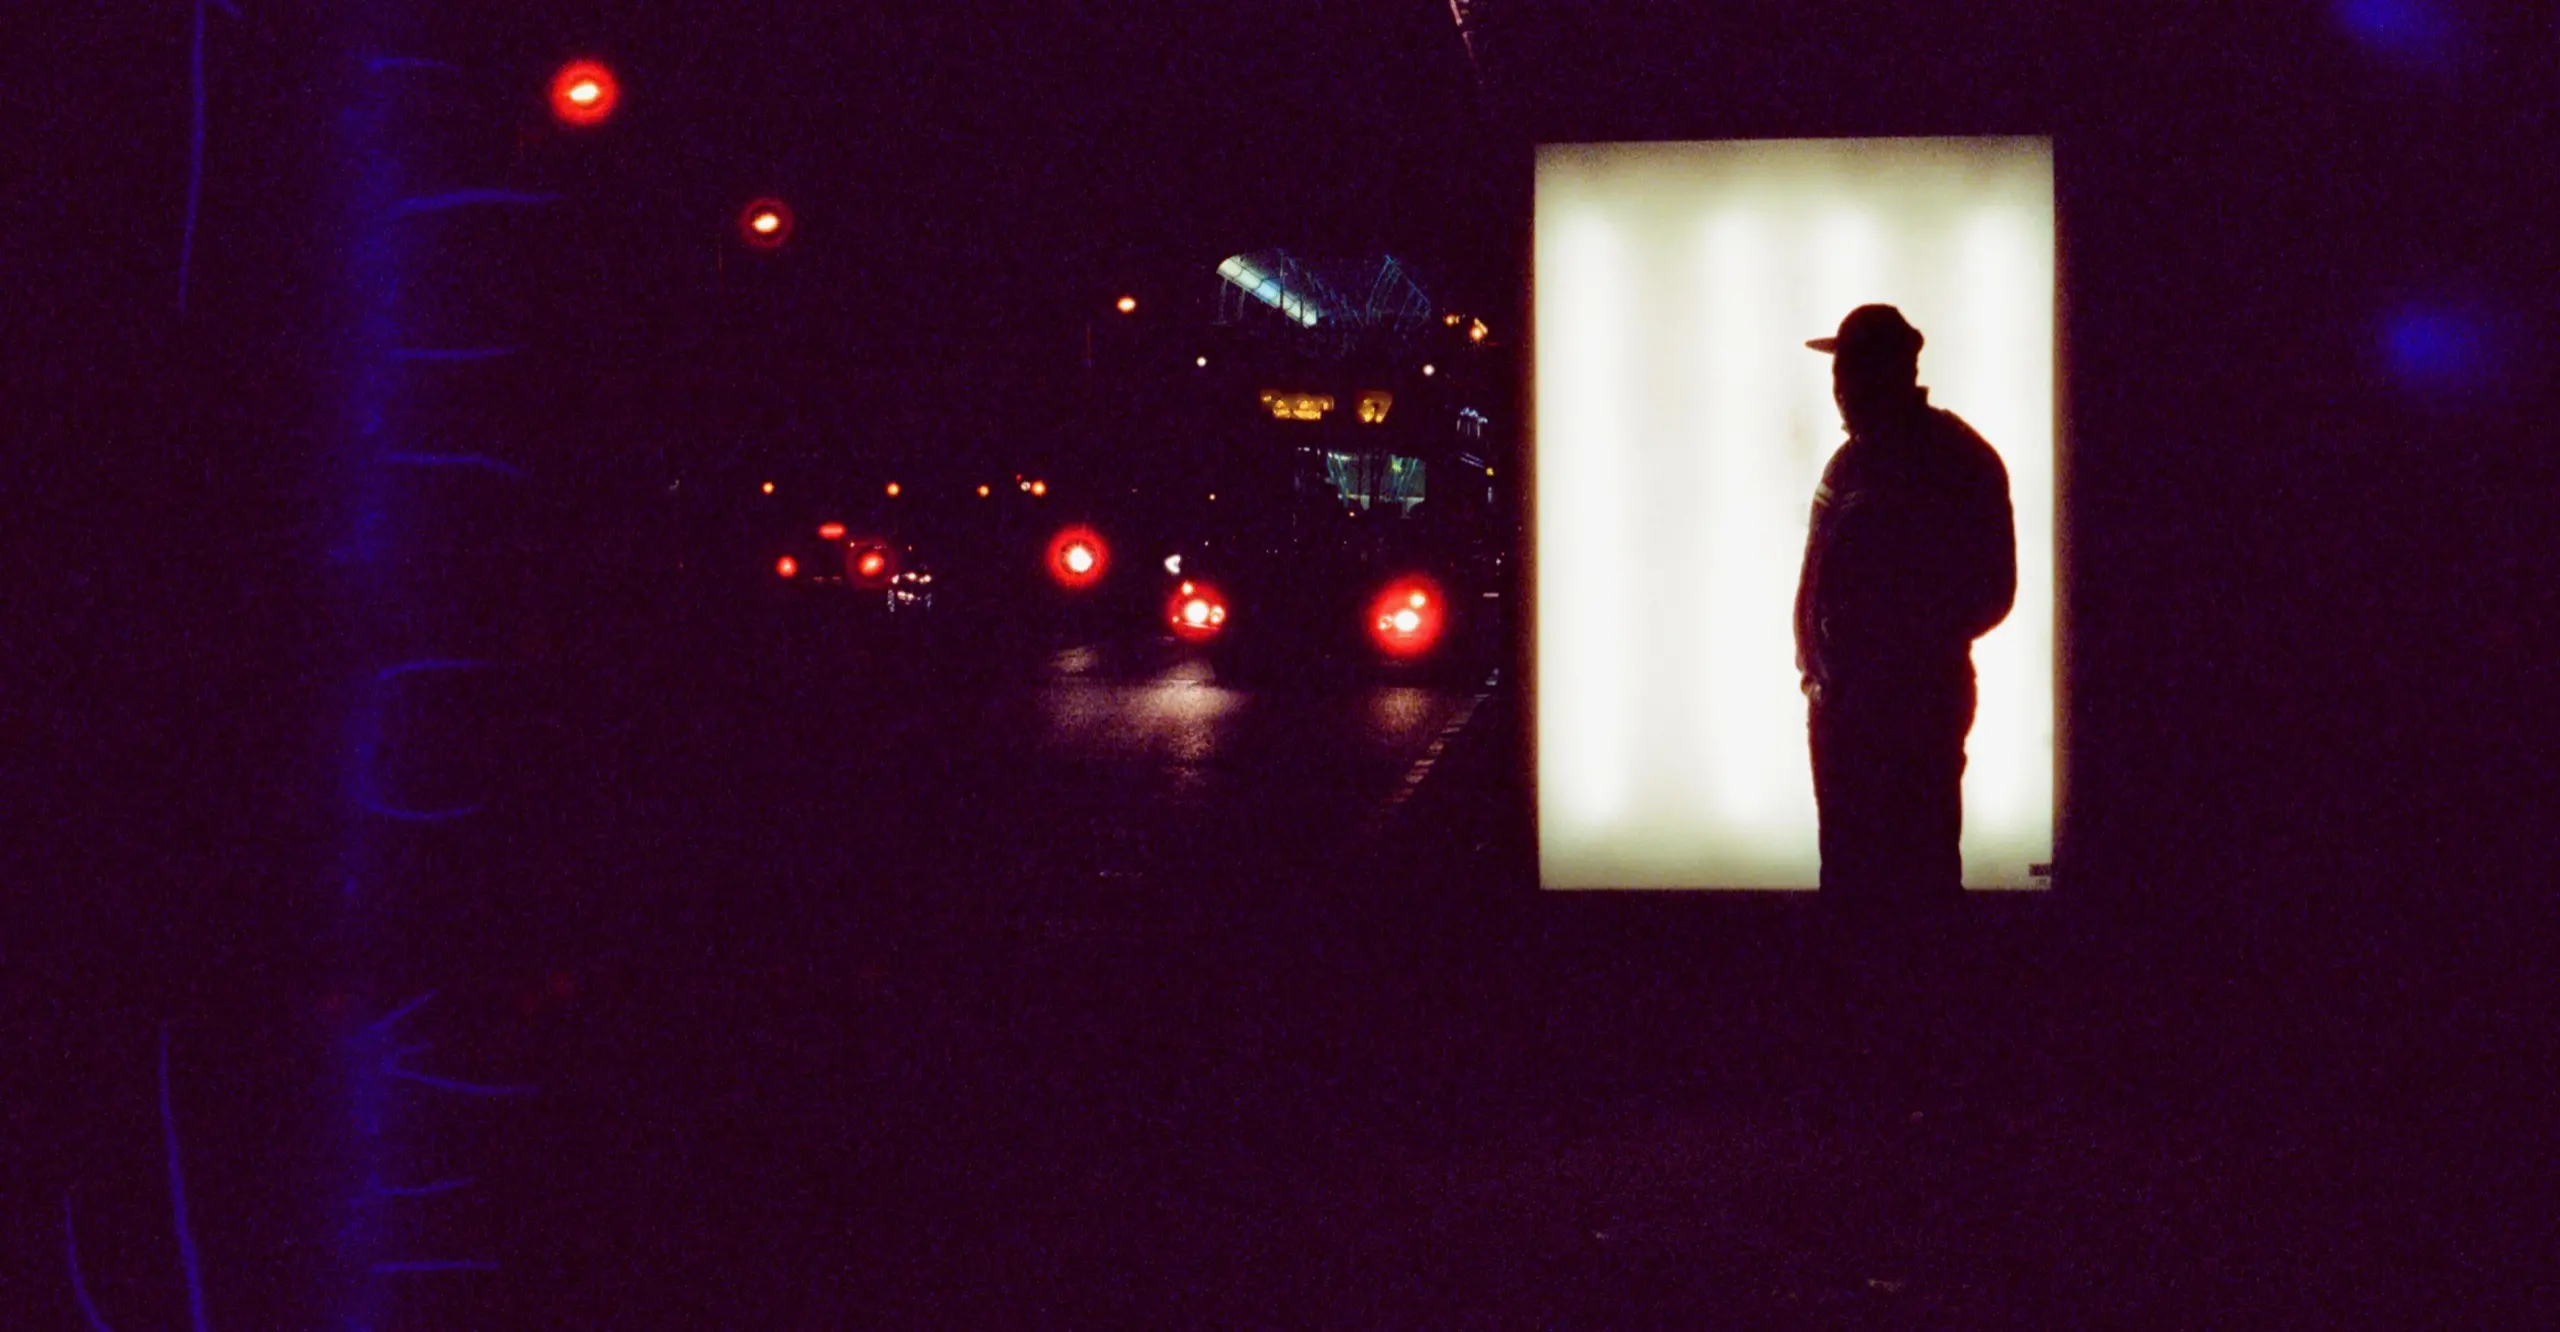 Silhouetted figure standing in front of a bus stop poster at night